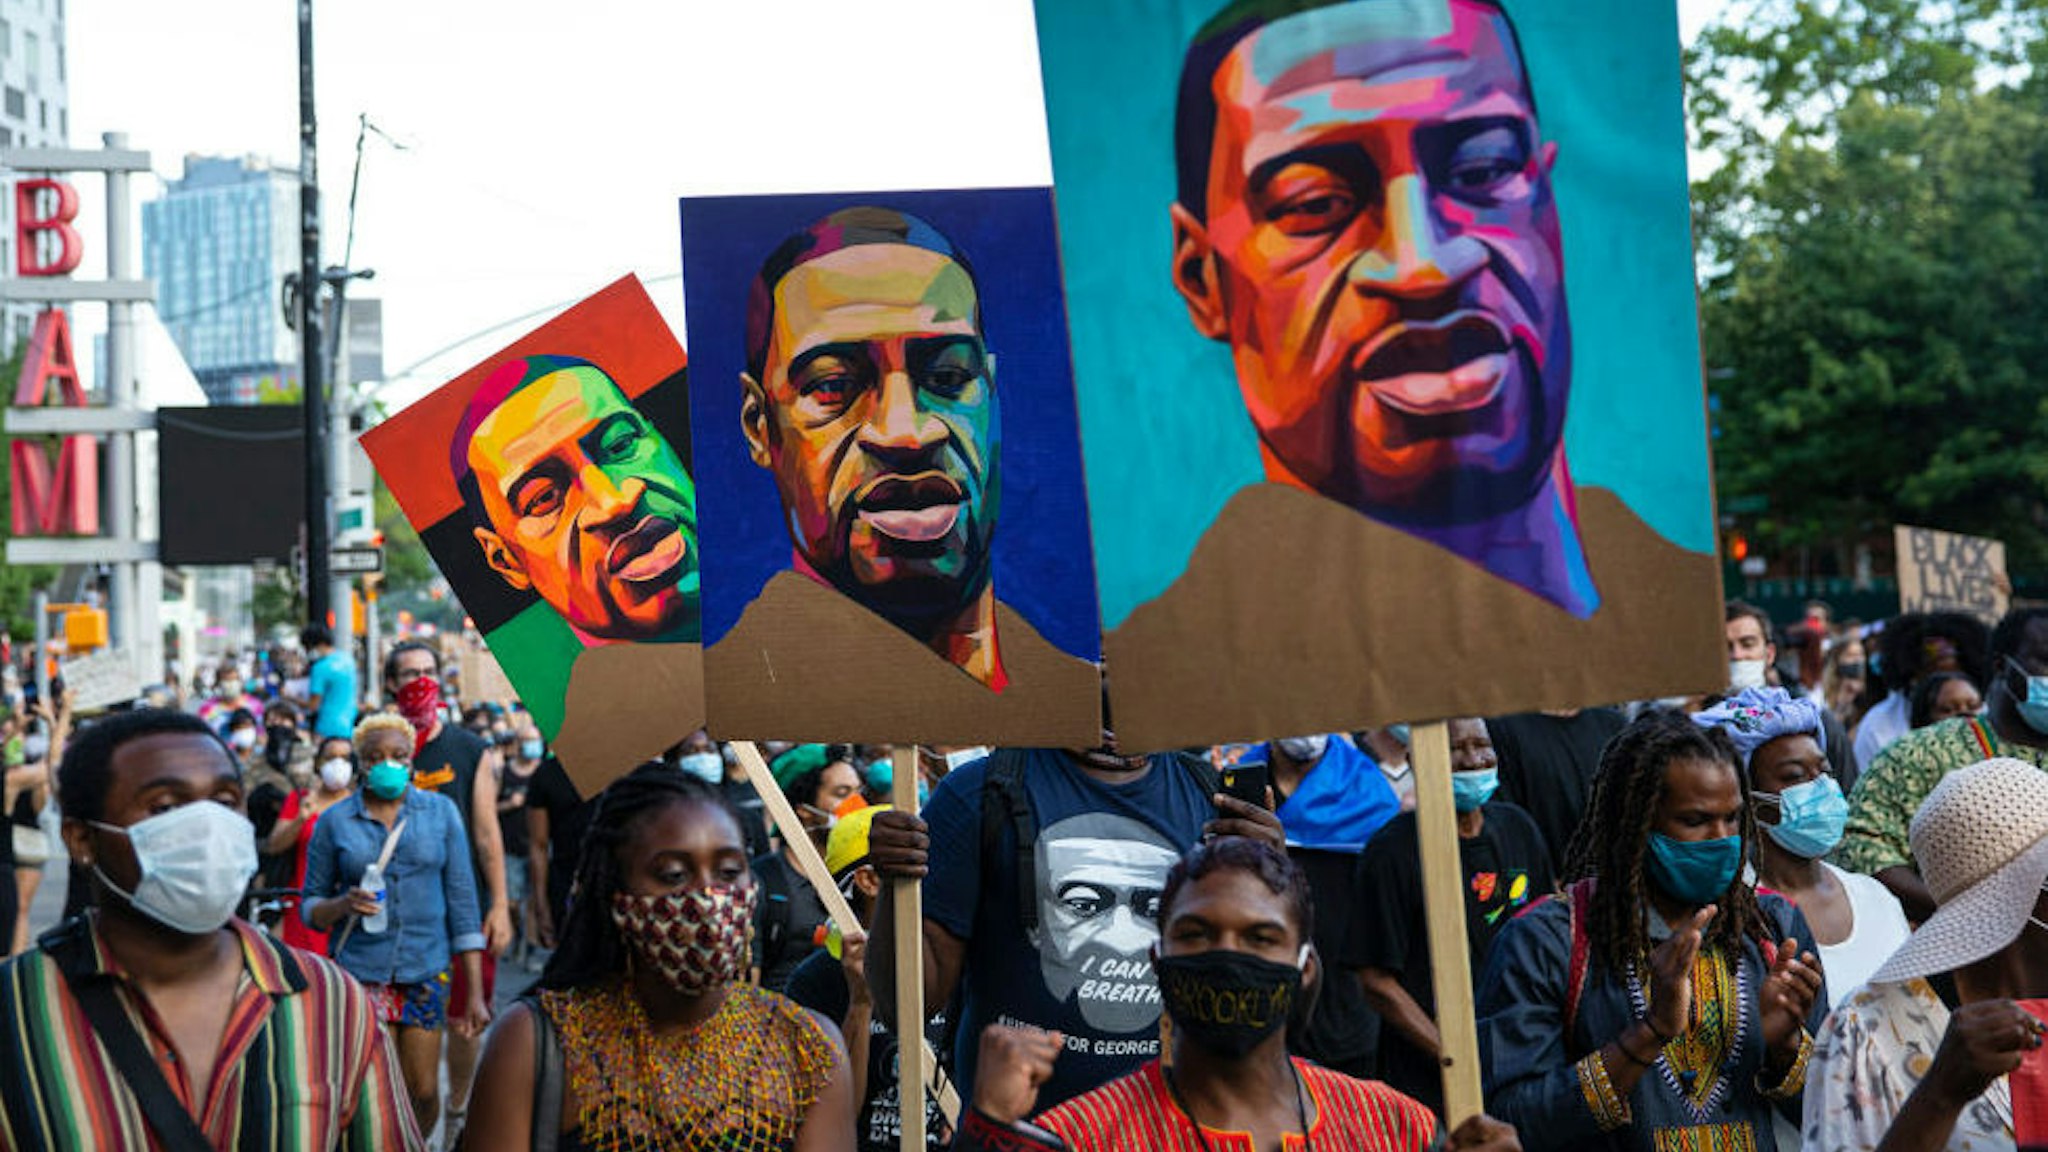 Pedestrians carry posters with the picture of George Floyd who was killed in police custody three weeks earlier in Minneapolis, Minnesota during the Juneteenth protest march on June 19, 2020 in the Brooklyn borough of New York City.